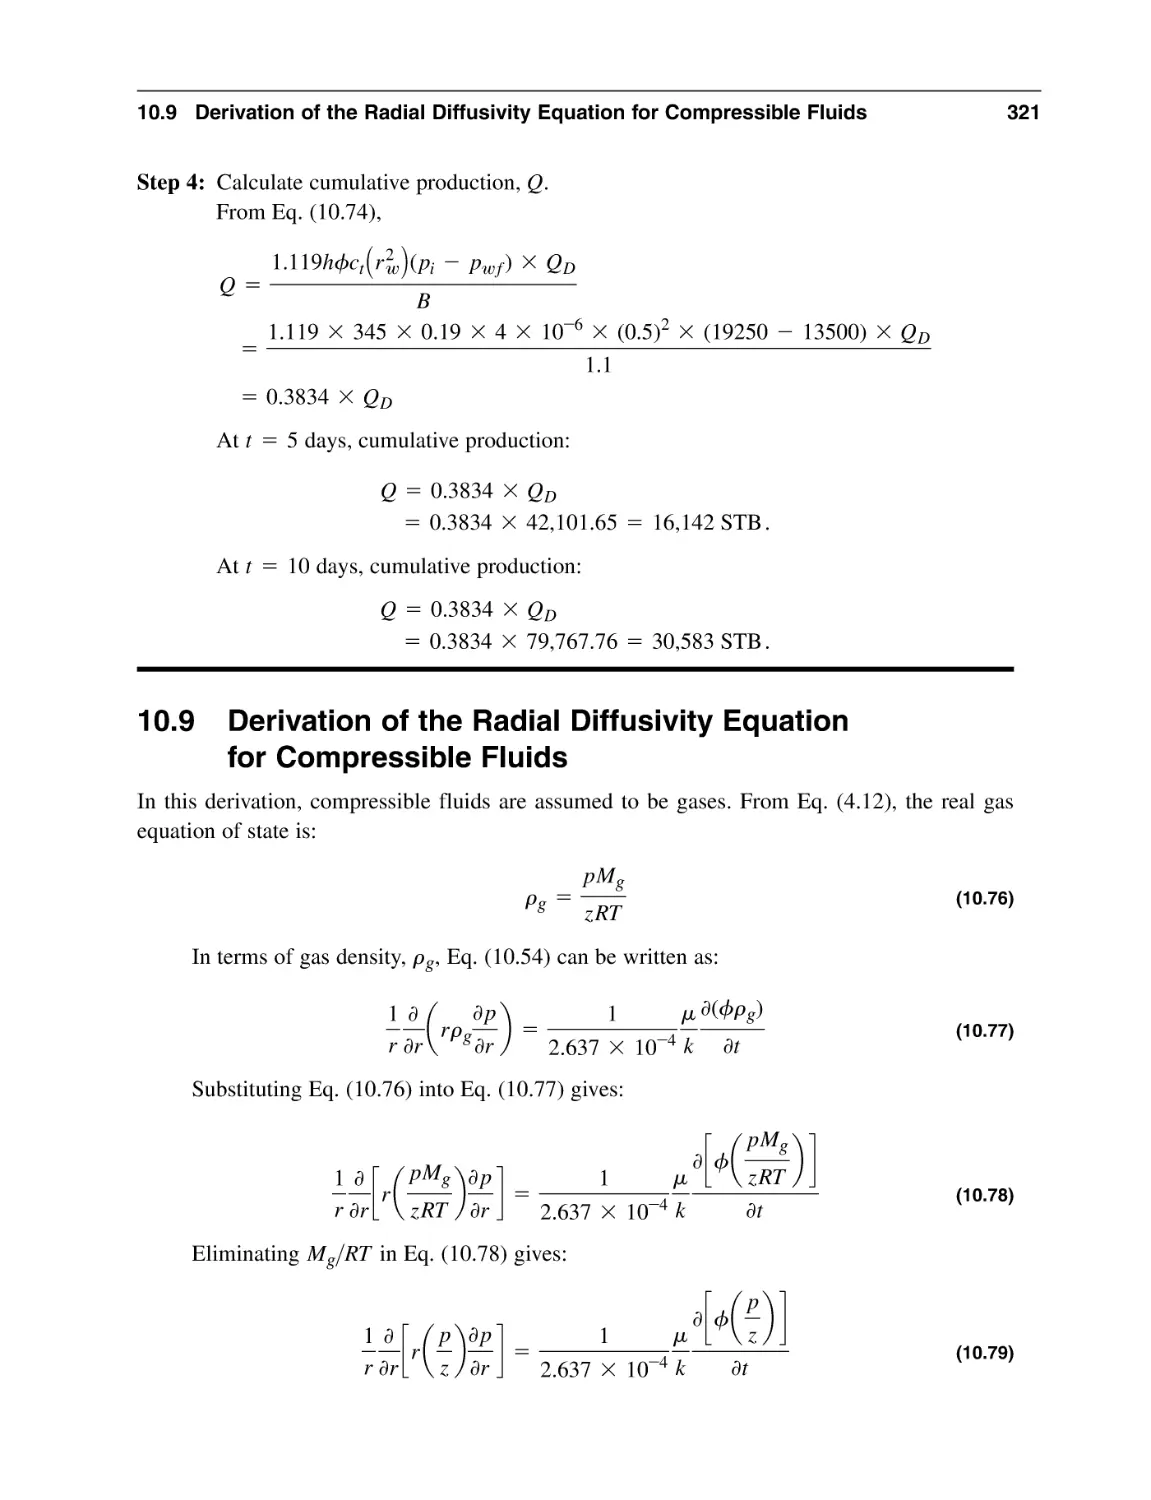 10.9 Derivation of the Radial Diffusivity Equation for Compressible Fluids